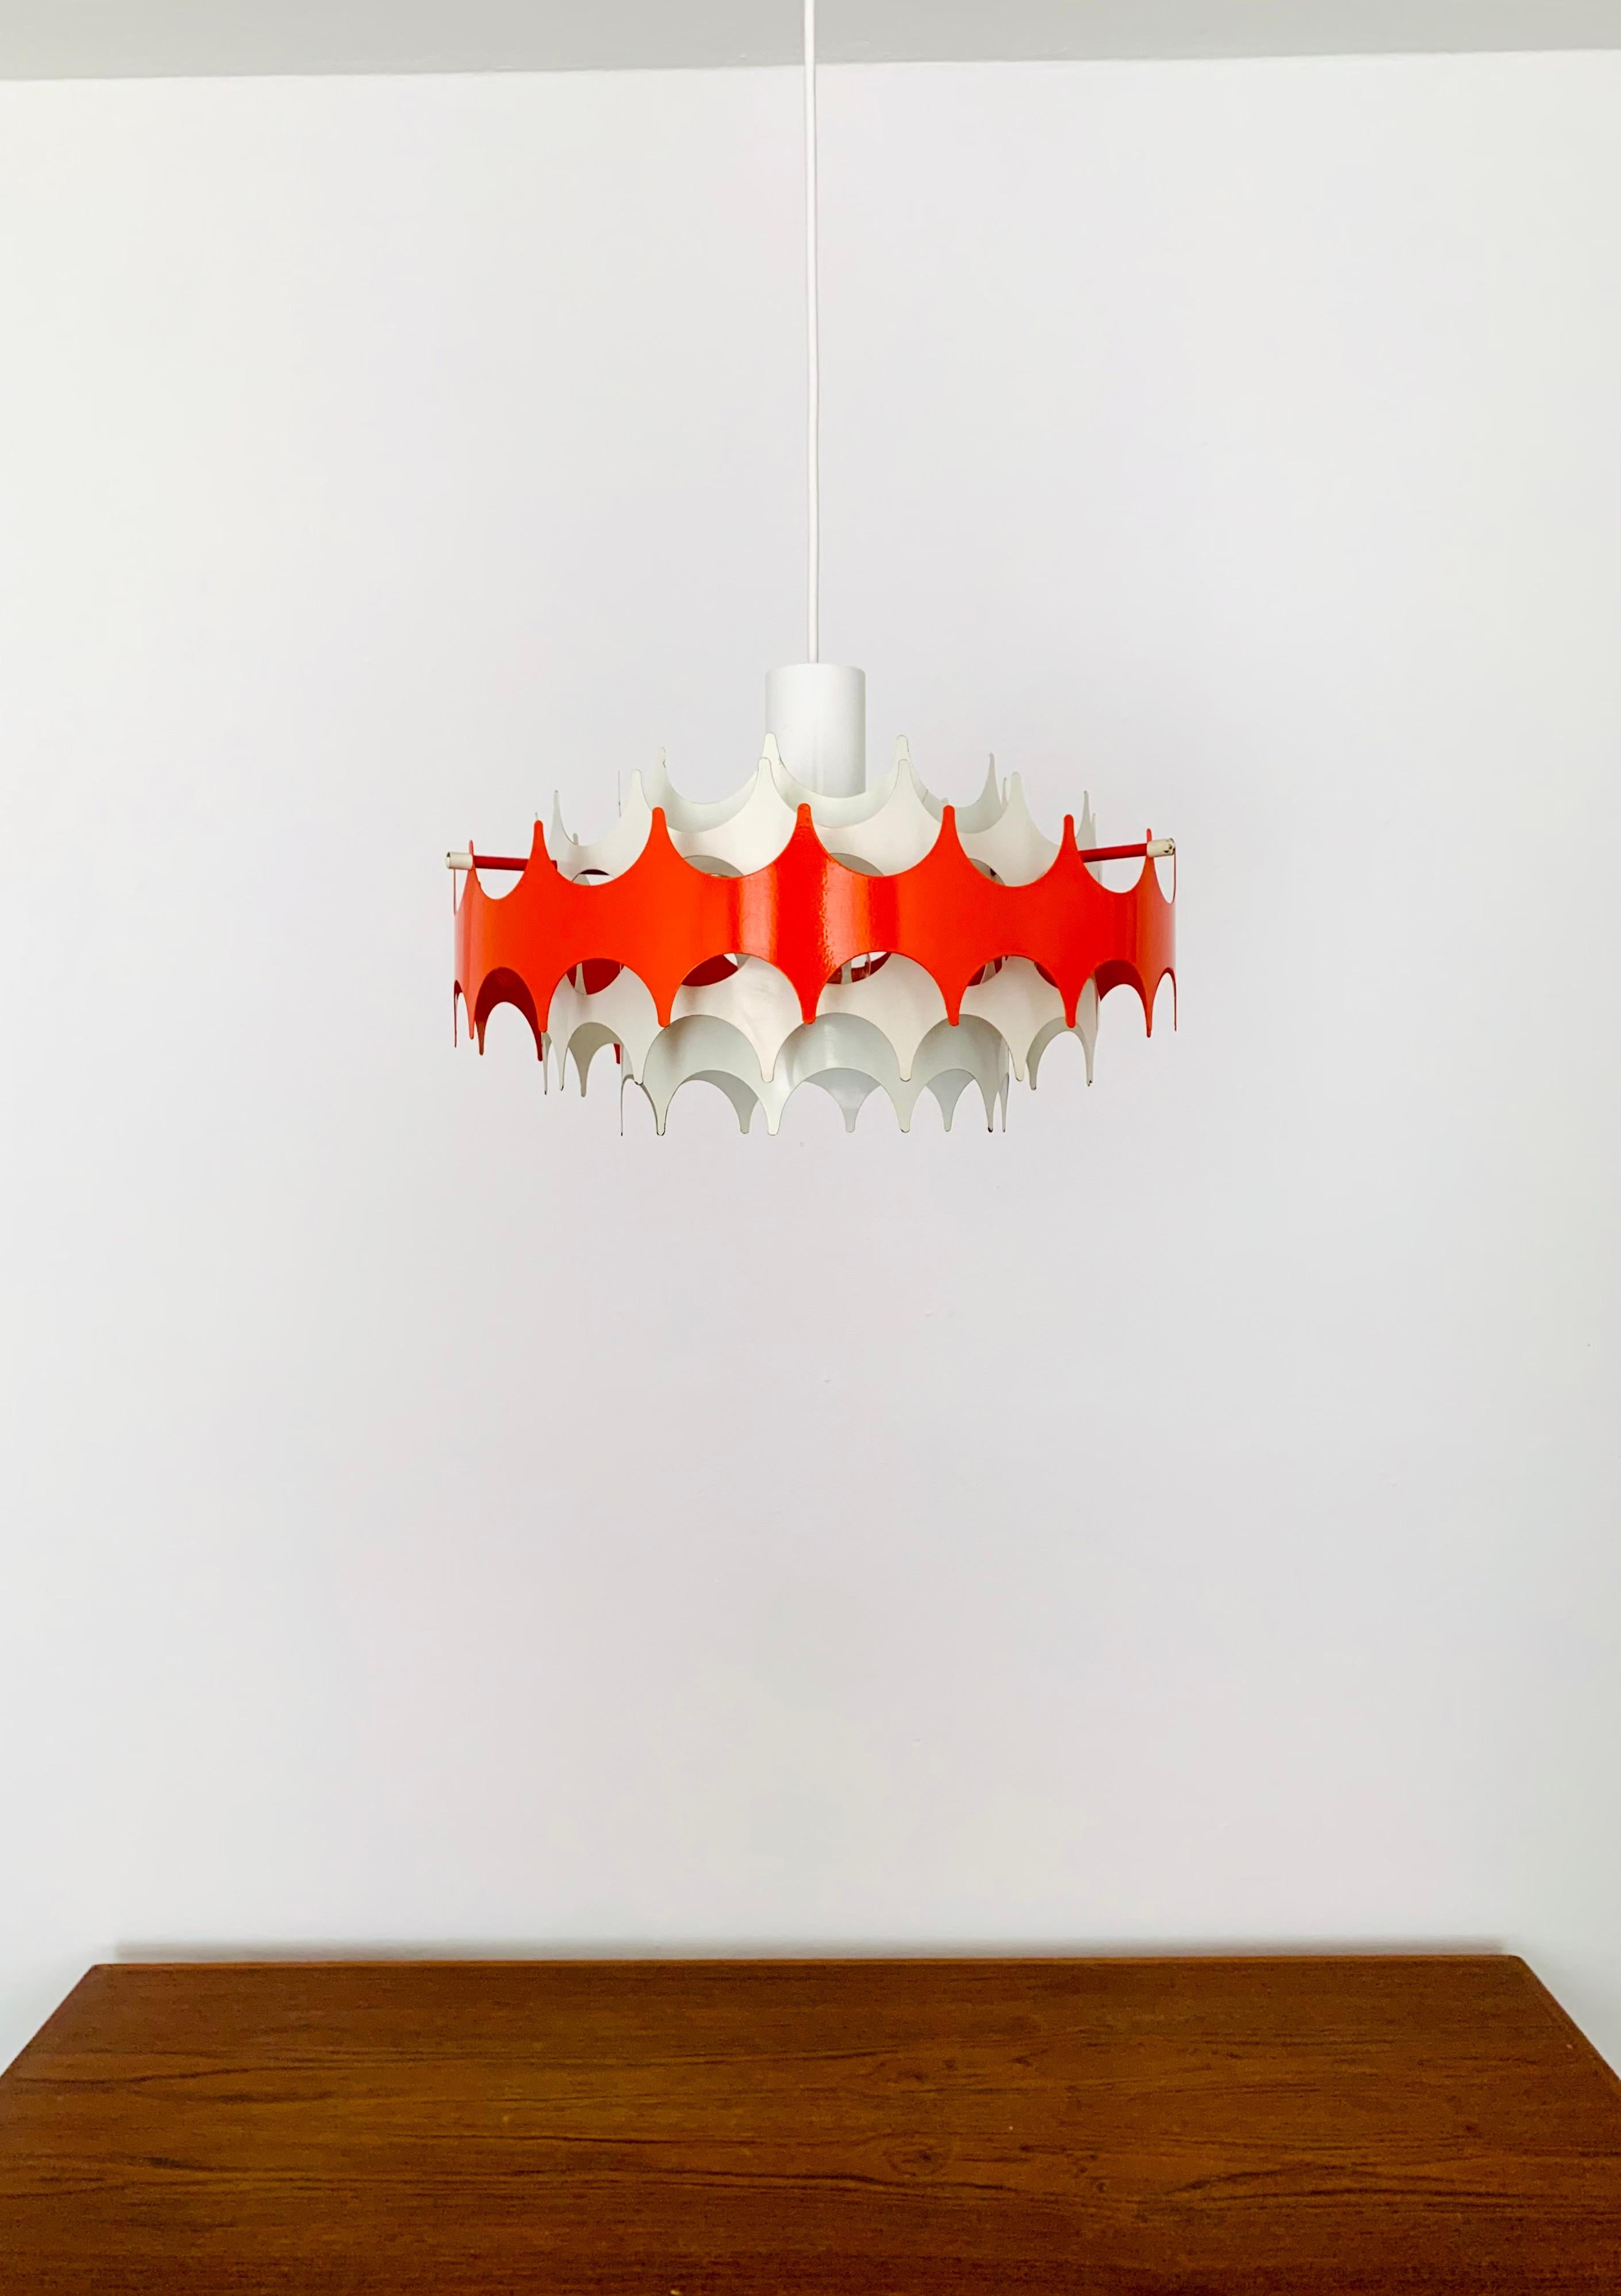 Beautiful pendant lamp from the 1960s.
Exceptionally high-quality workmanship with a fantastic appearance.
The design creates a spectacular play of light in the room.

Manufacturer: Doria

Condition:

Very good vintage condition with slight signs of